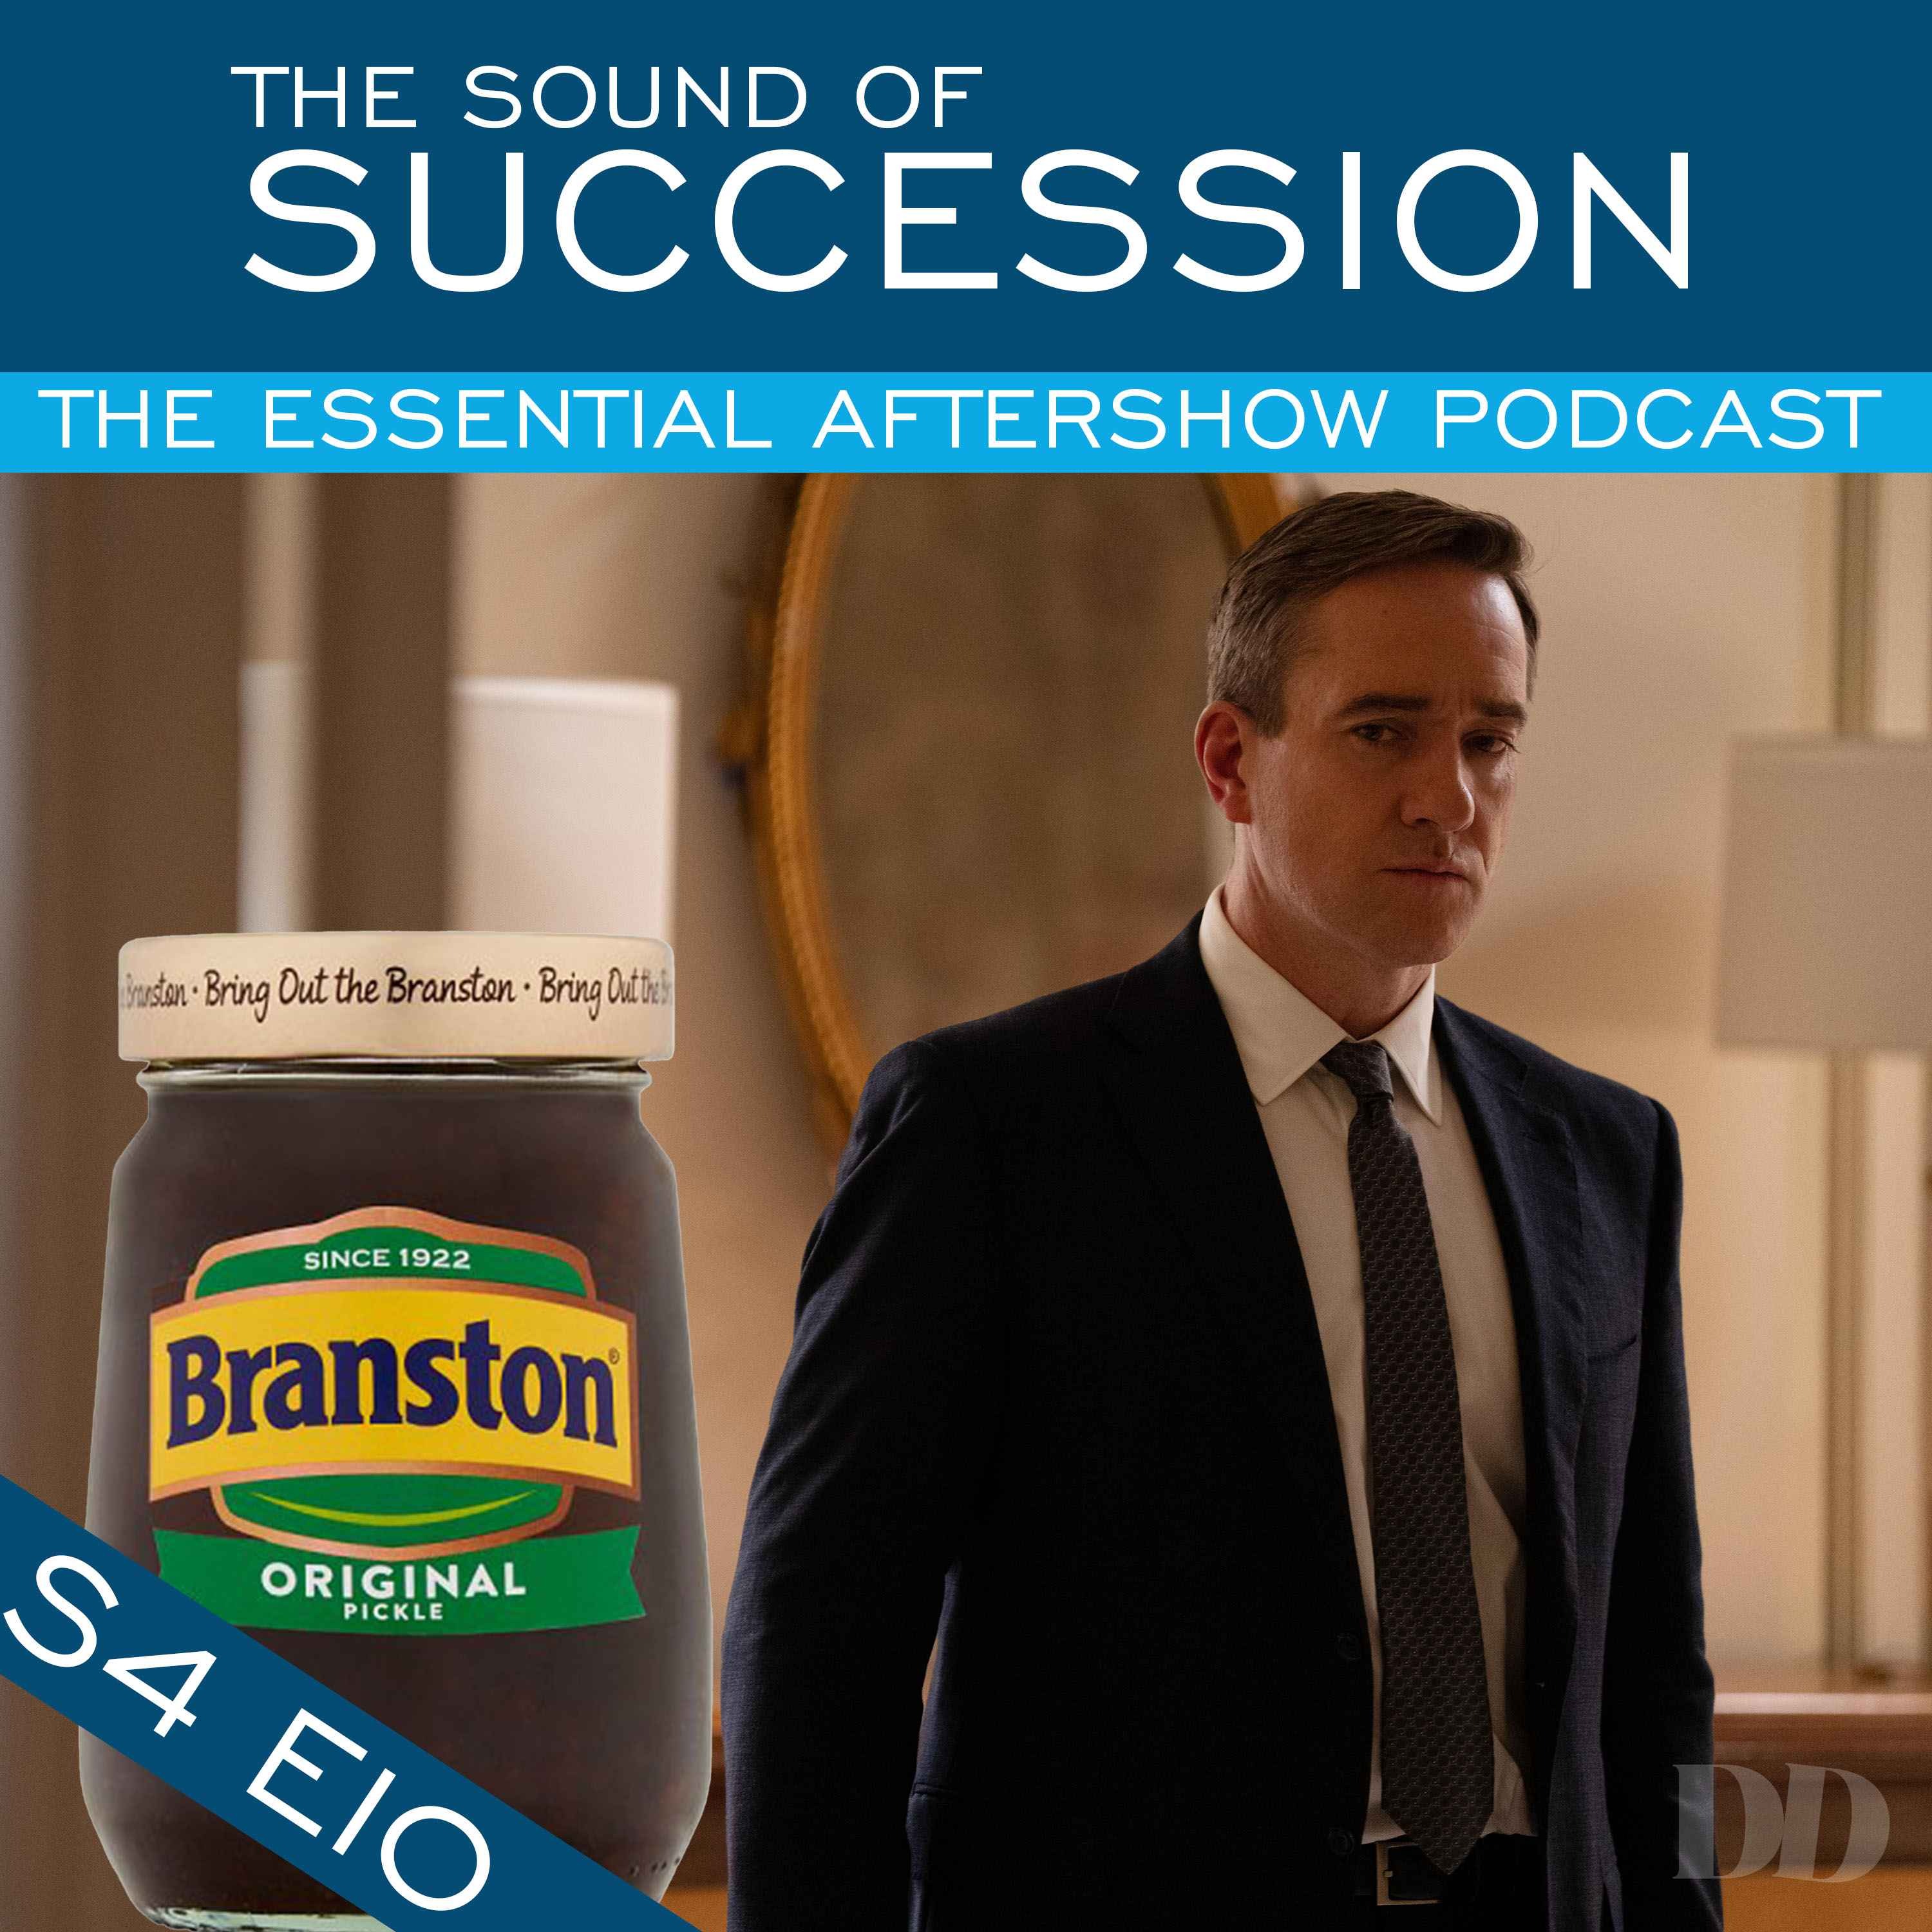 The Sound of Succession: Season 4 Episode 10 - With Open Eyes